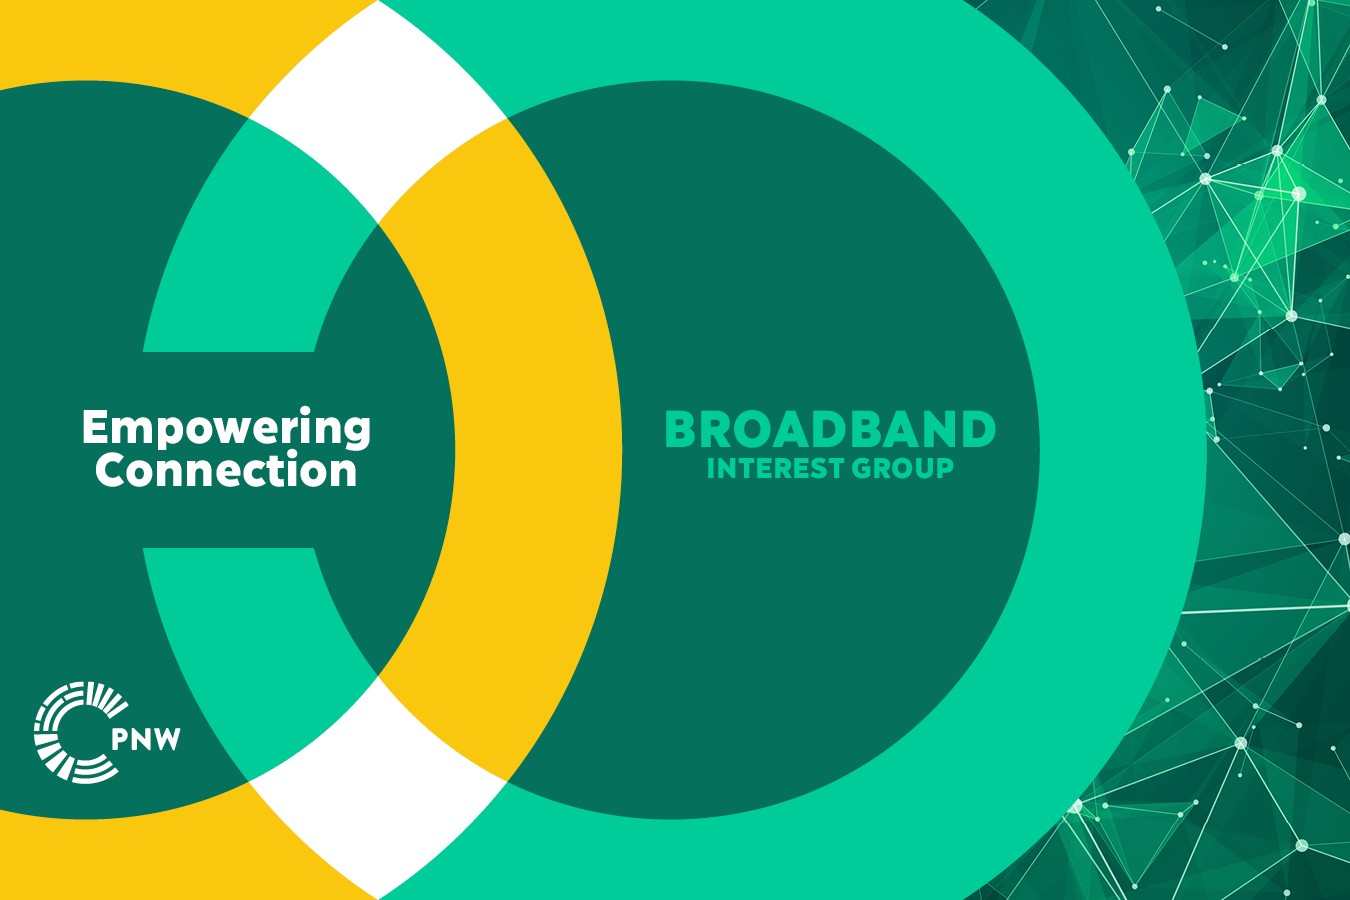 Broadband Interest Group graphic with the tagline "Empowering Connection"